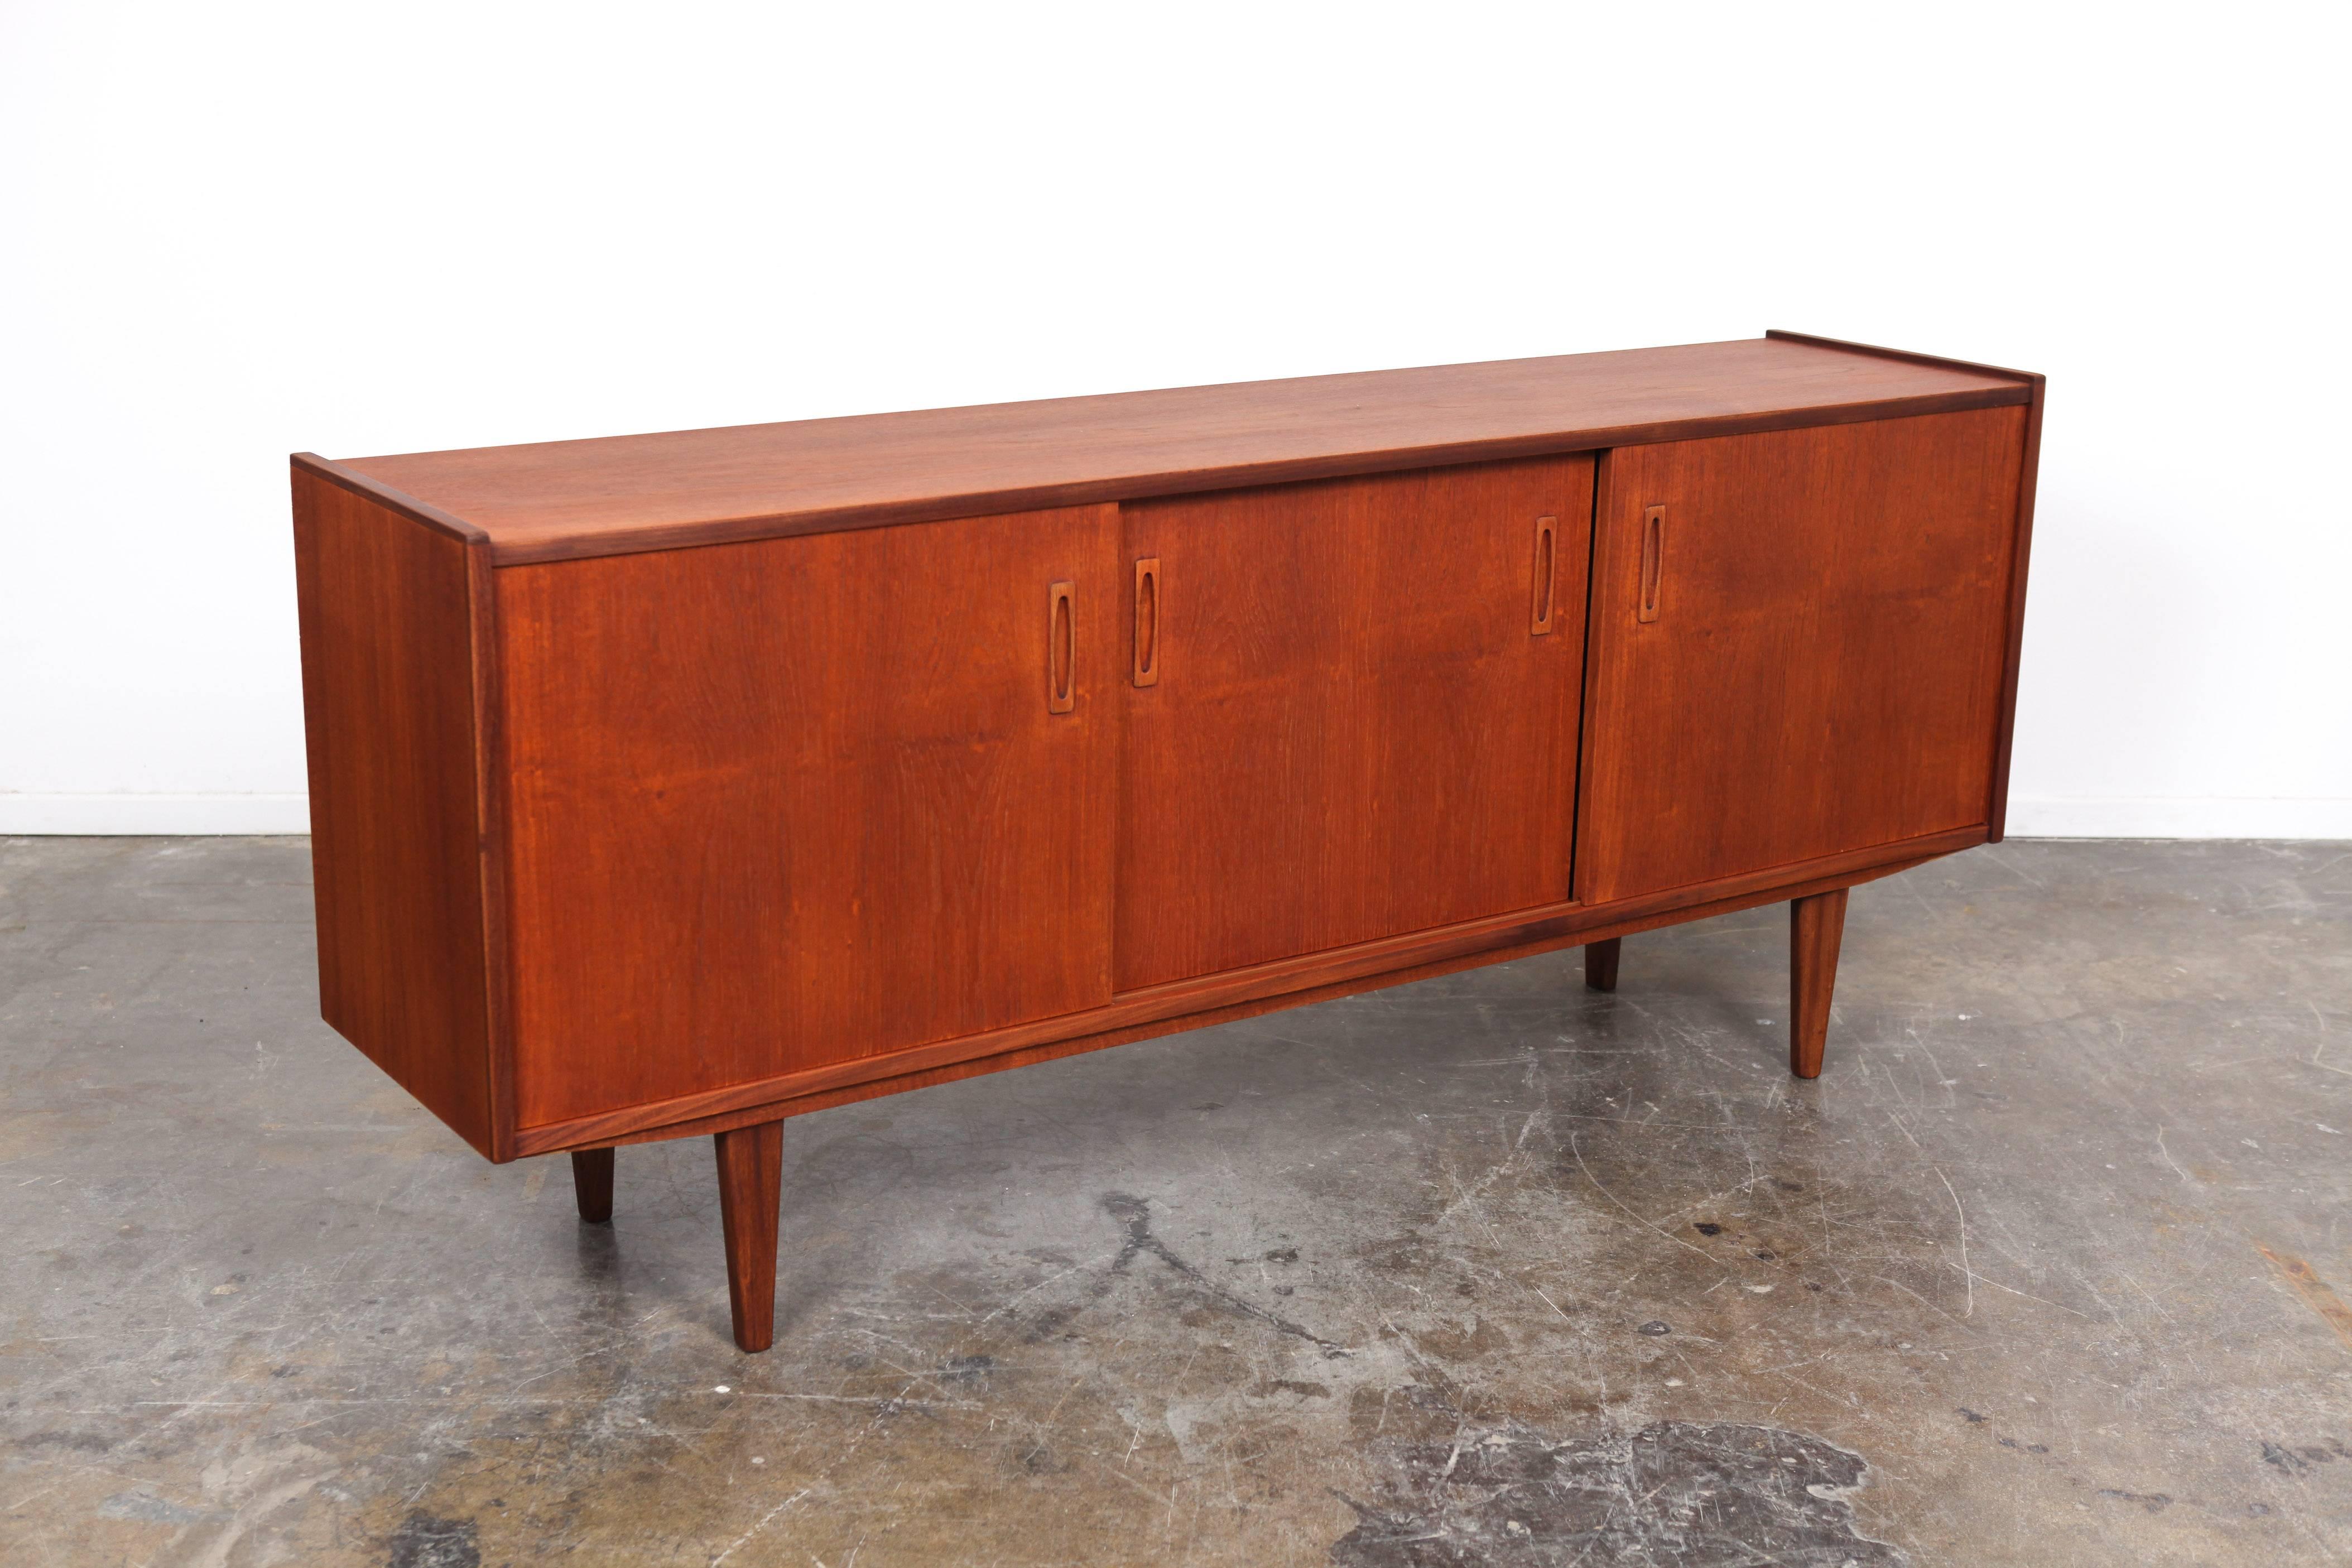 Danish teak three door (sliding) sideboard with Classic Mid-Century pulls, 1960s. This piece features a felt lined cutlery drawer and is supported by tapered teak legs.
 